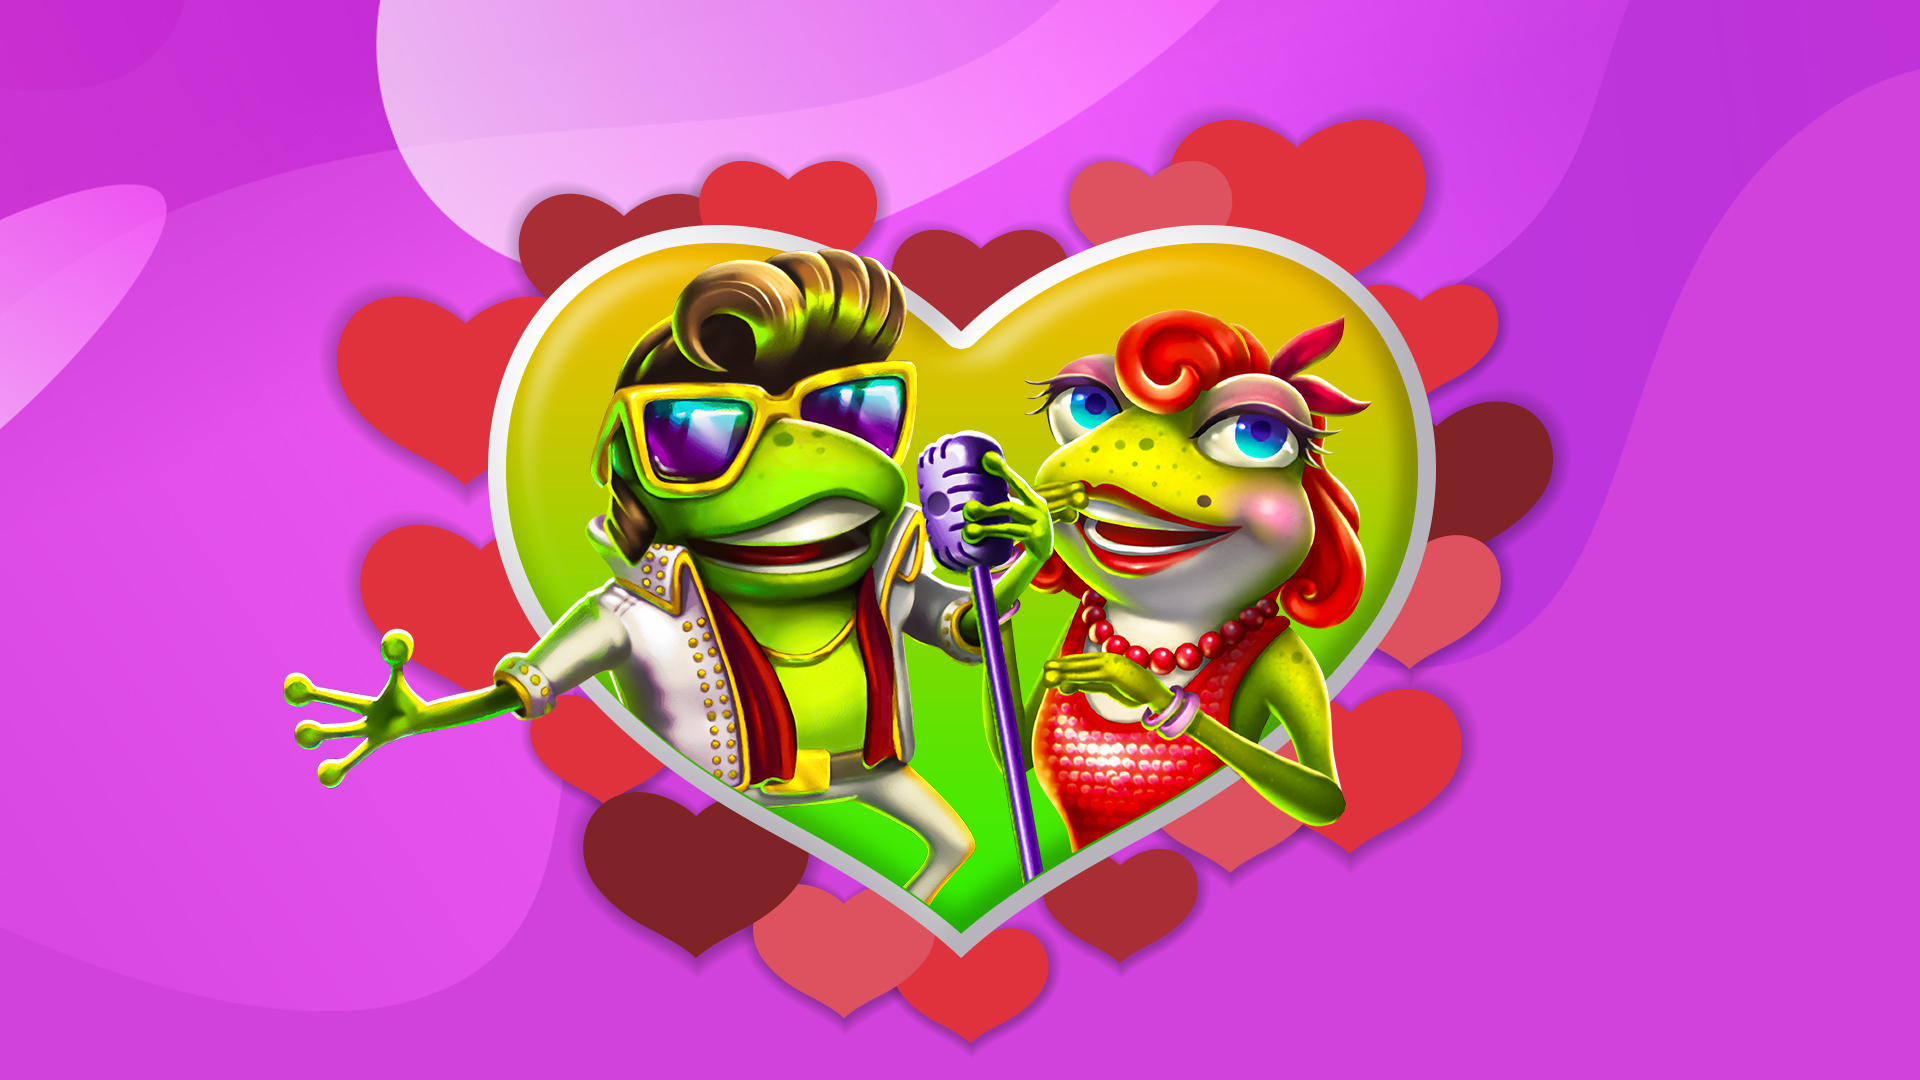 Elvis styled frogs are positioned in a love heart on a purple background.